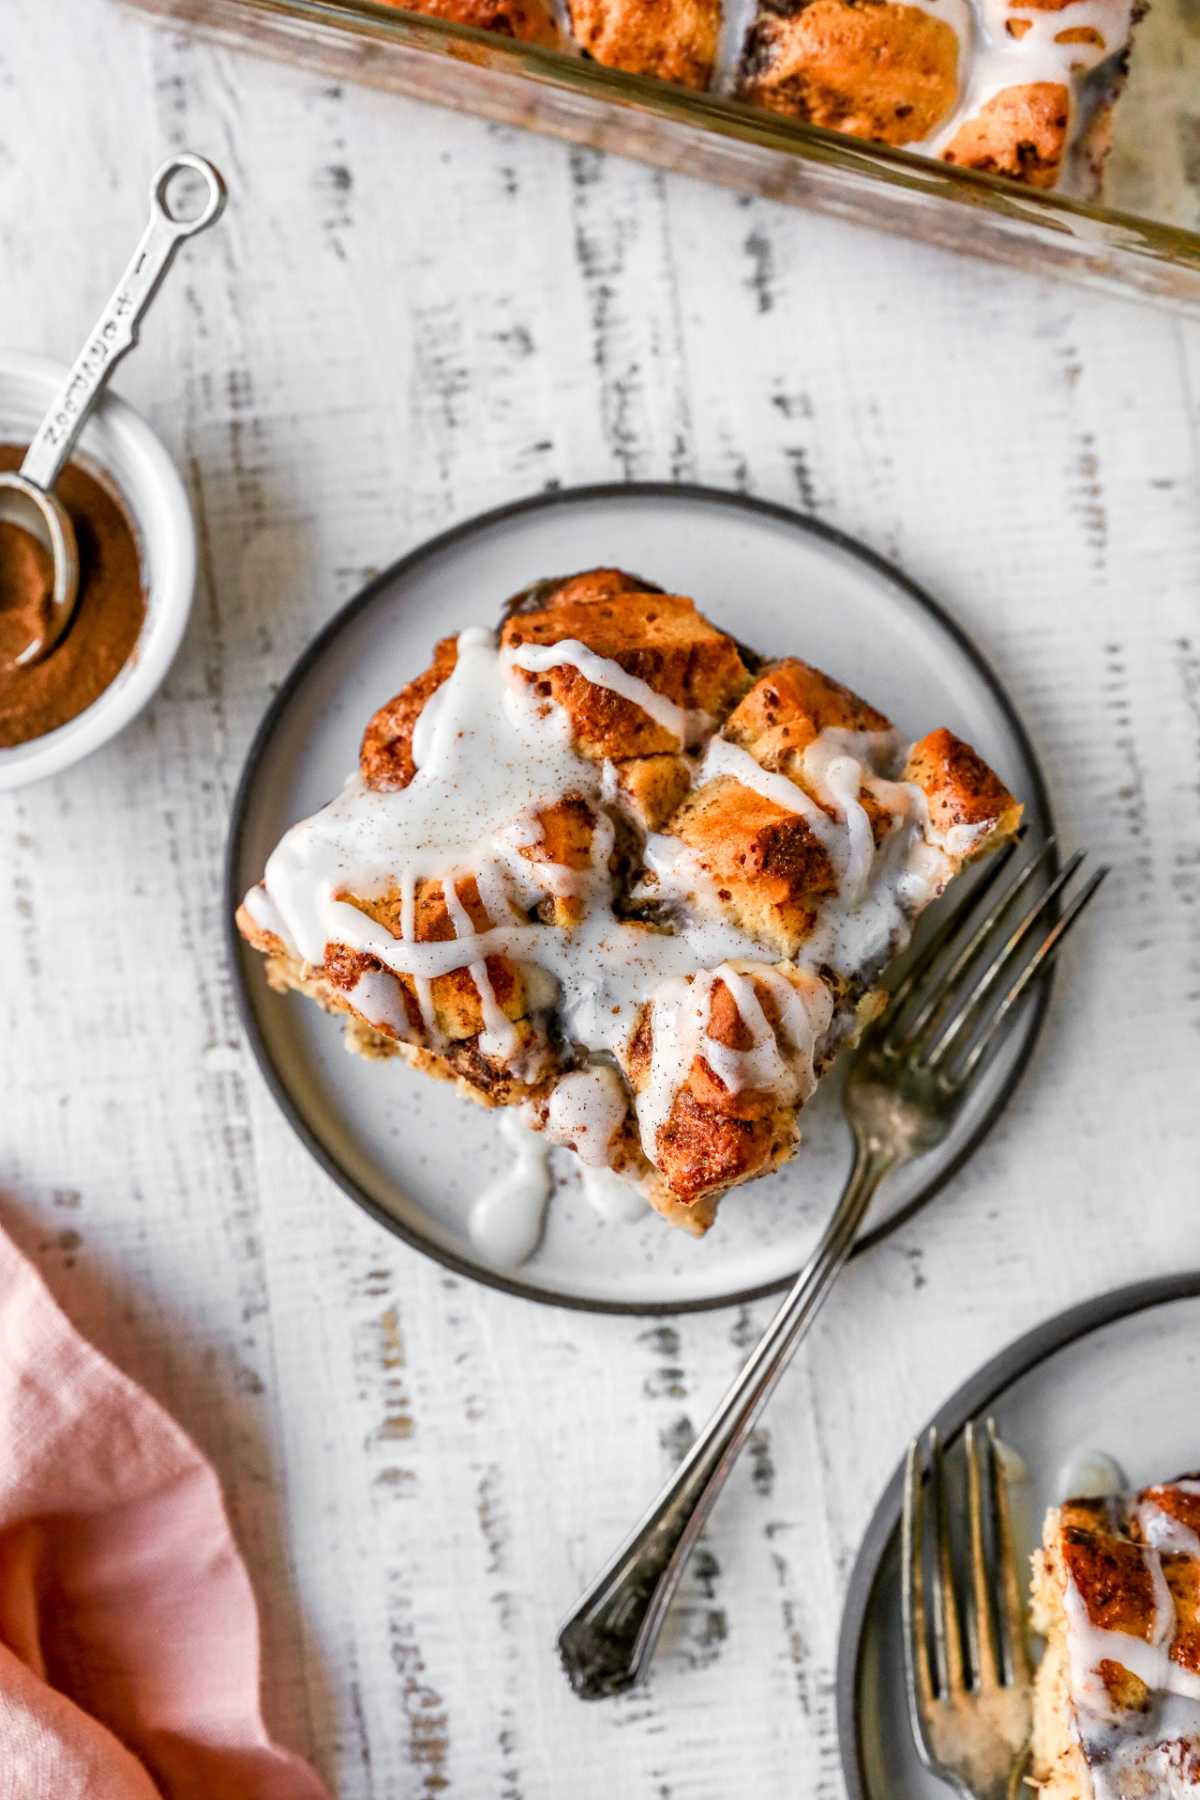 Sweet piece of breakfast bake drizzled with icing served on a plate.